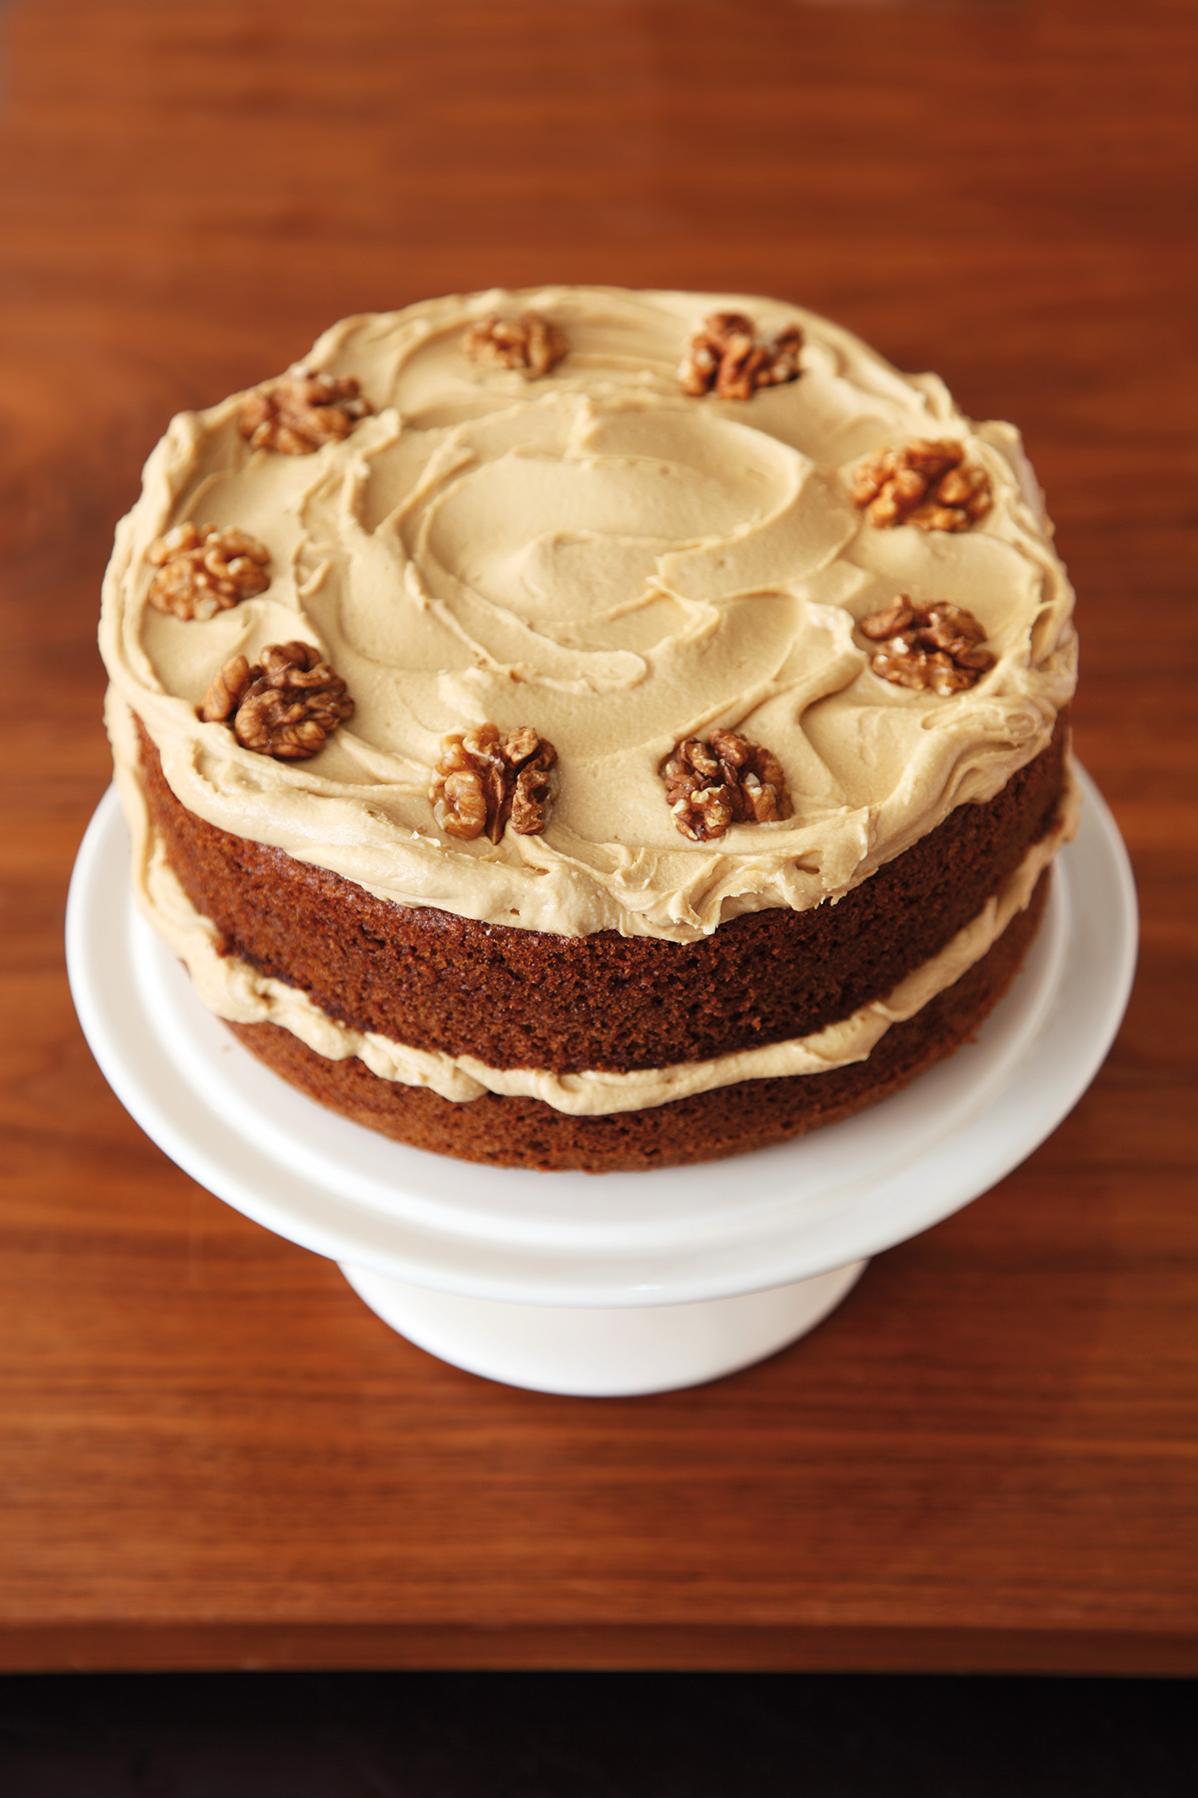  You don't have to choose between coffee and dessert anymore - this cake has both!